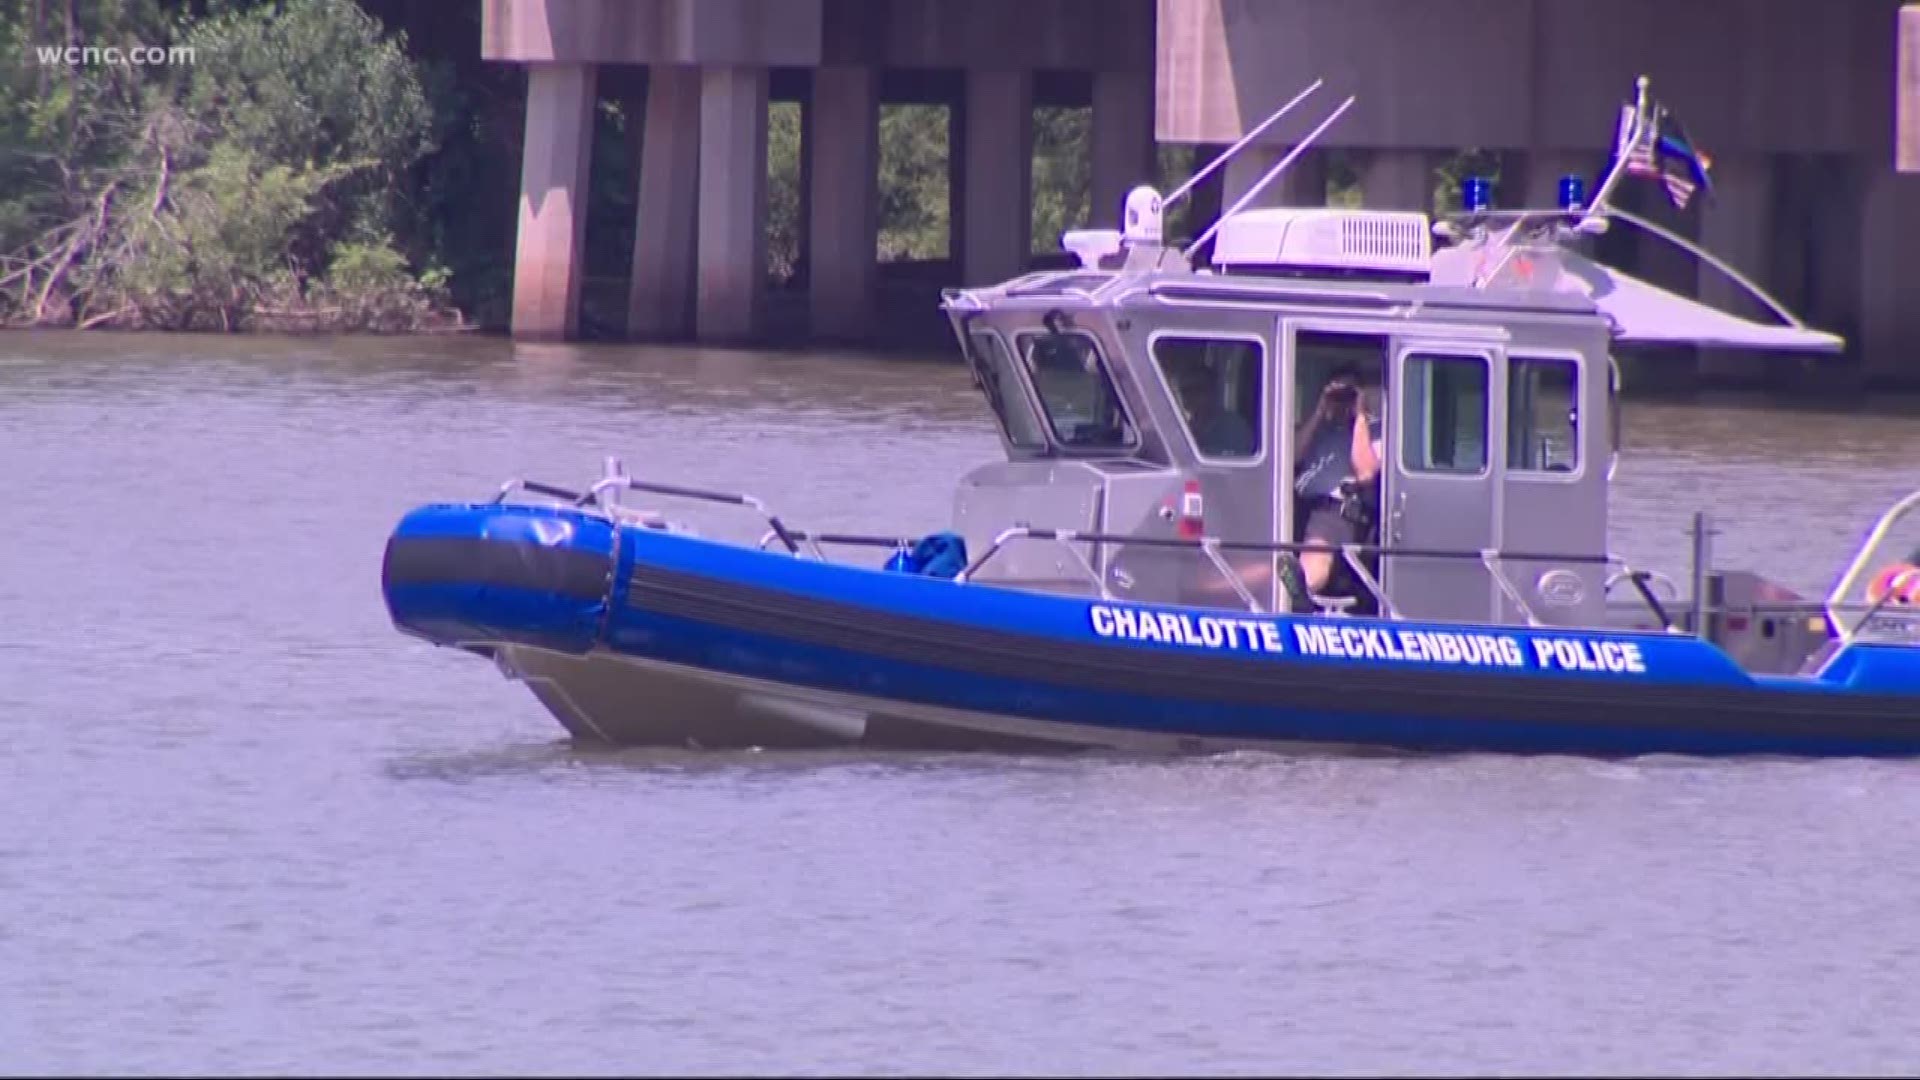 Police say a group was ferrying back to the boat launch after fishing and camping on an island up the river. That's when police say the front of the boat started taking in water and went down. Officials say three of the boaters made it to shore, but one did not.